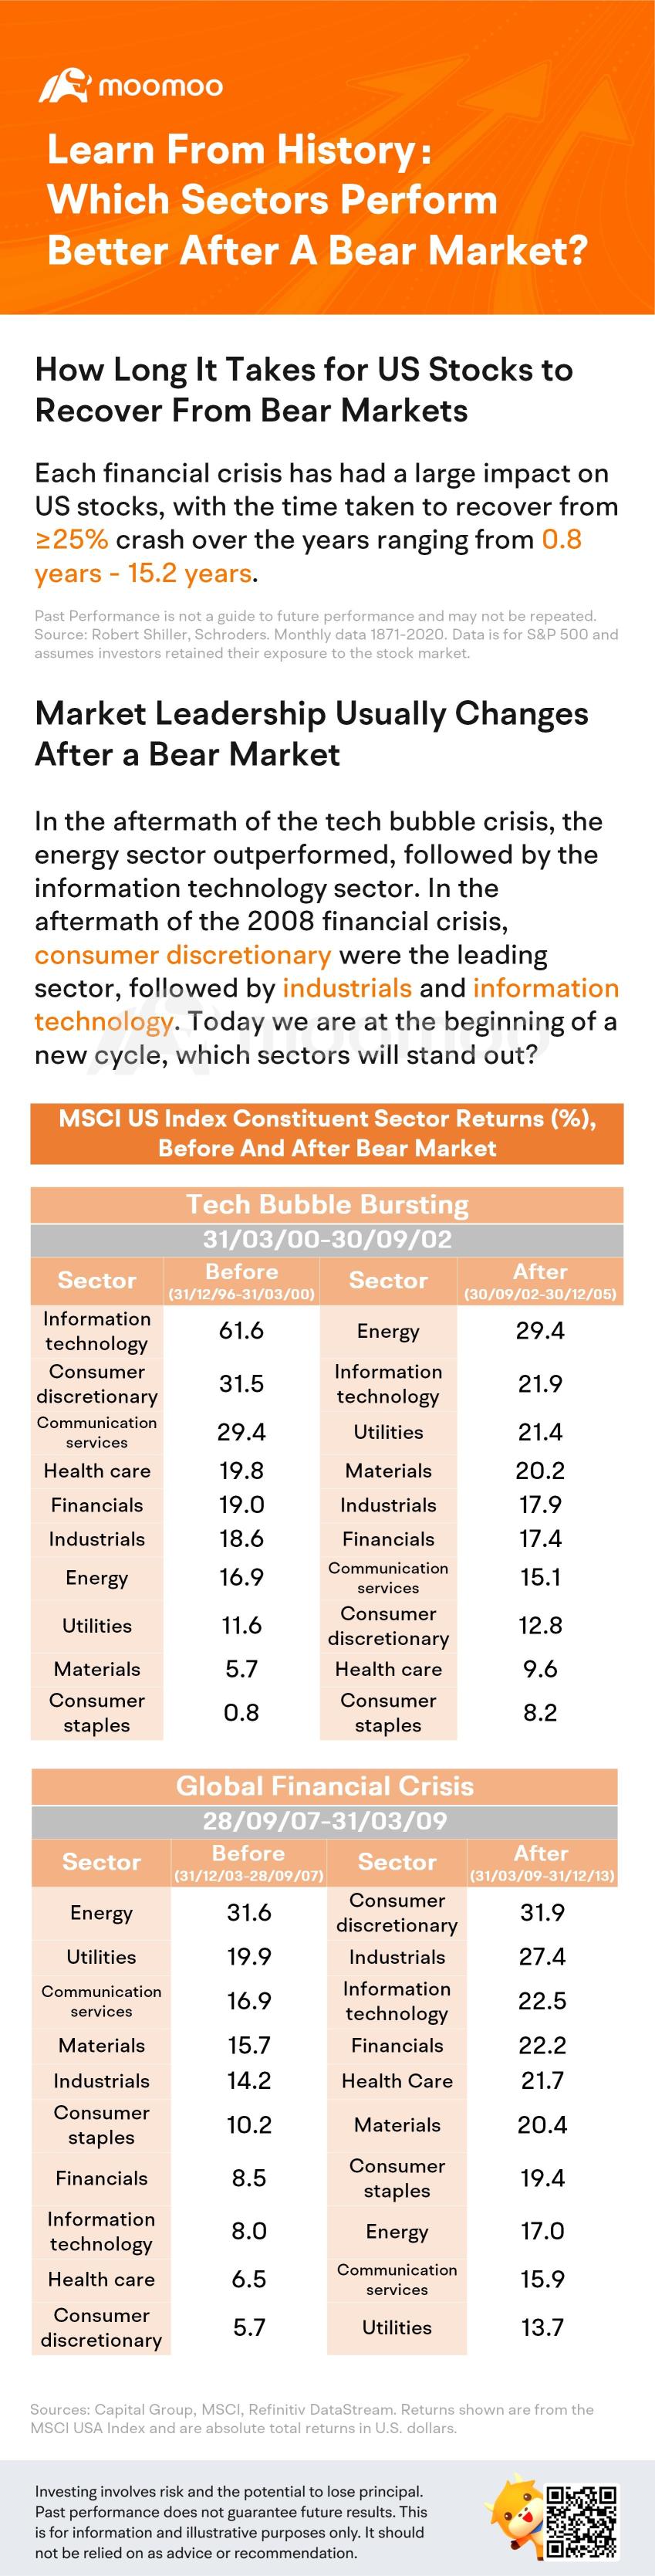 Learn From History: Which Sectors Perform Better After A Bear Market?